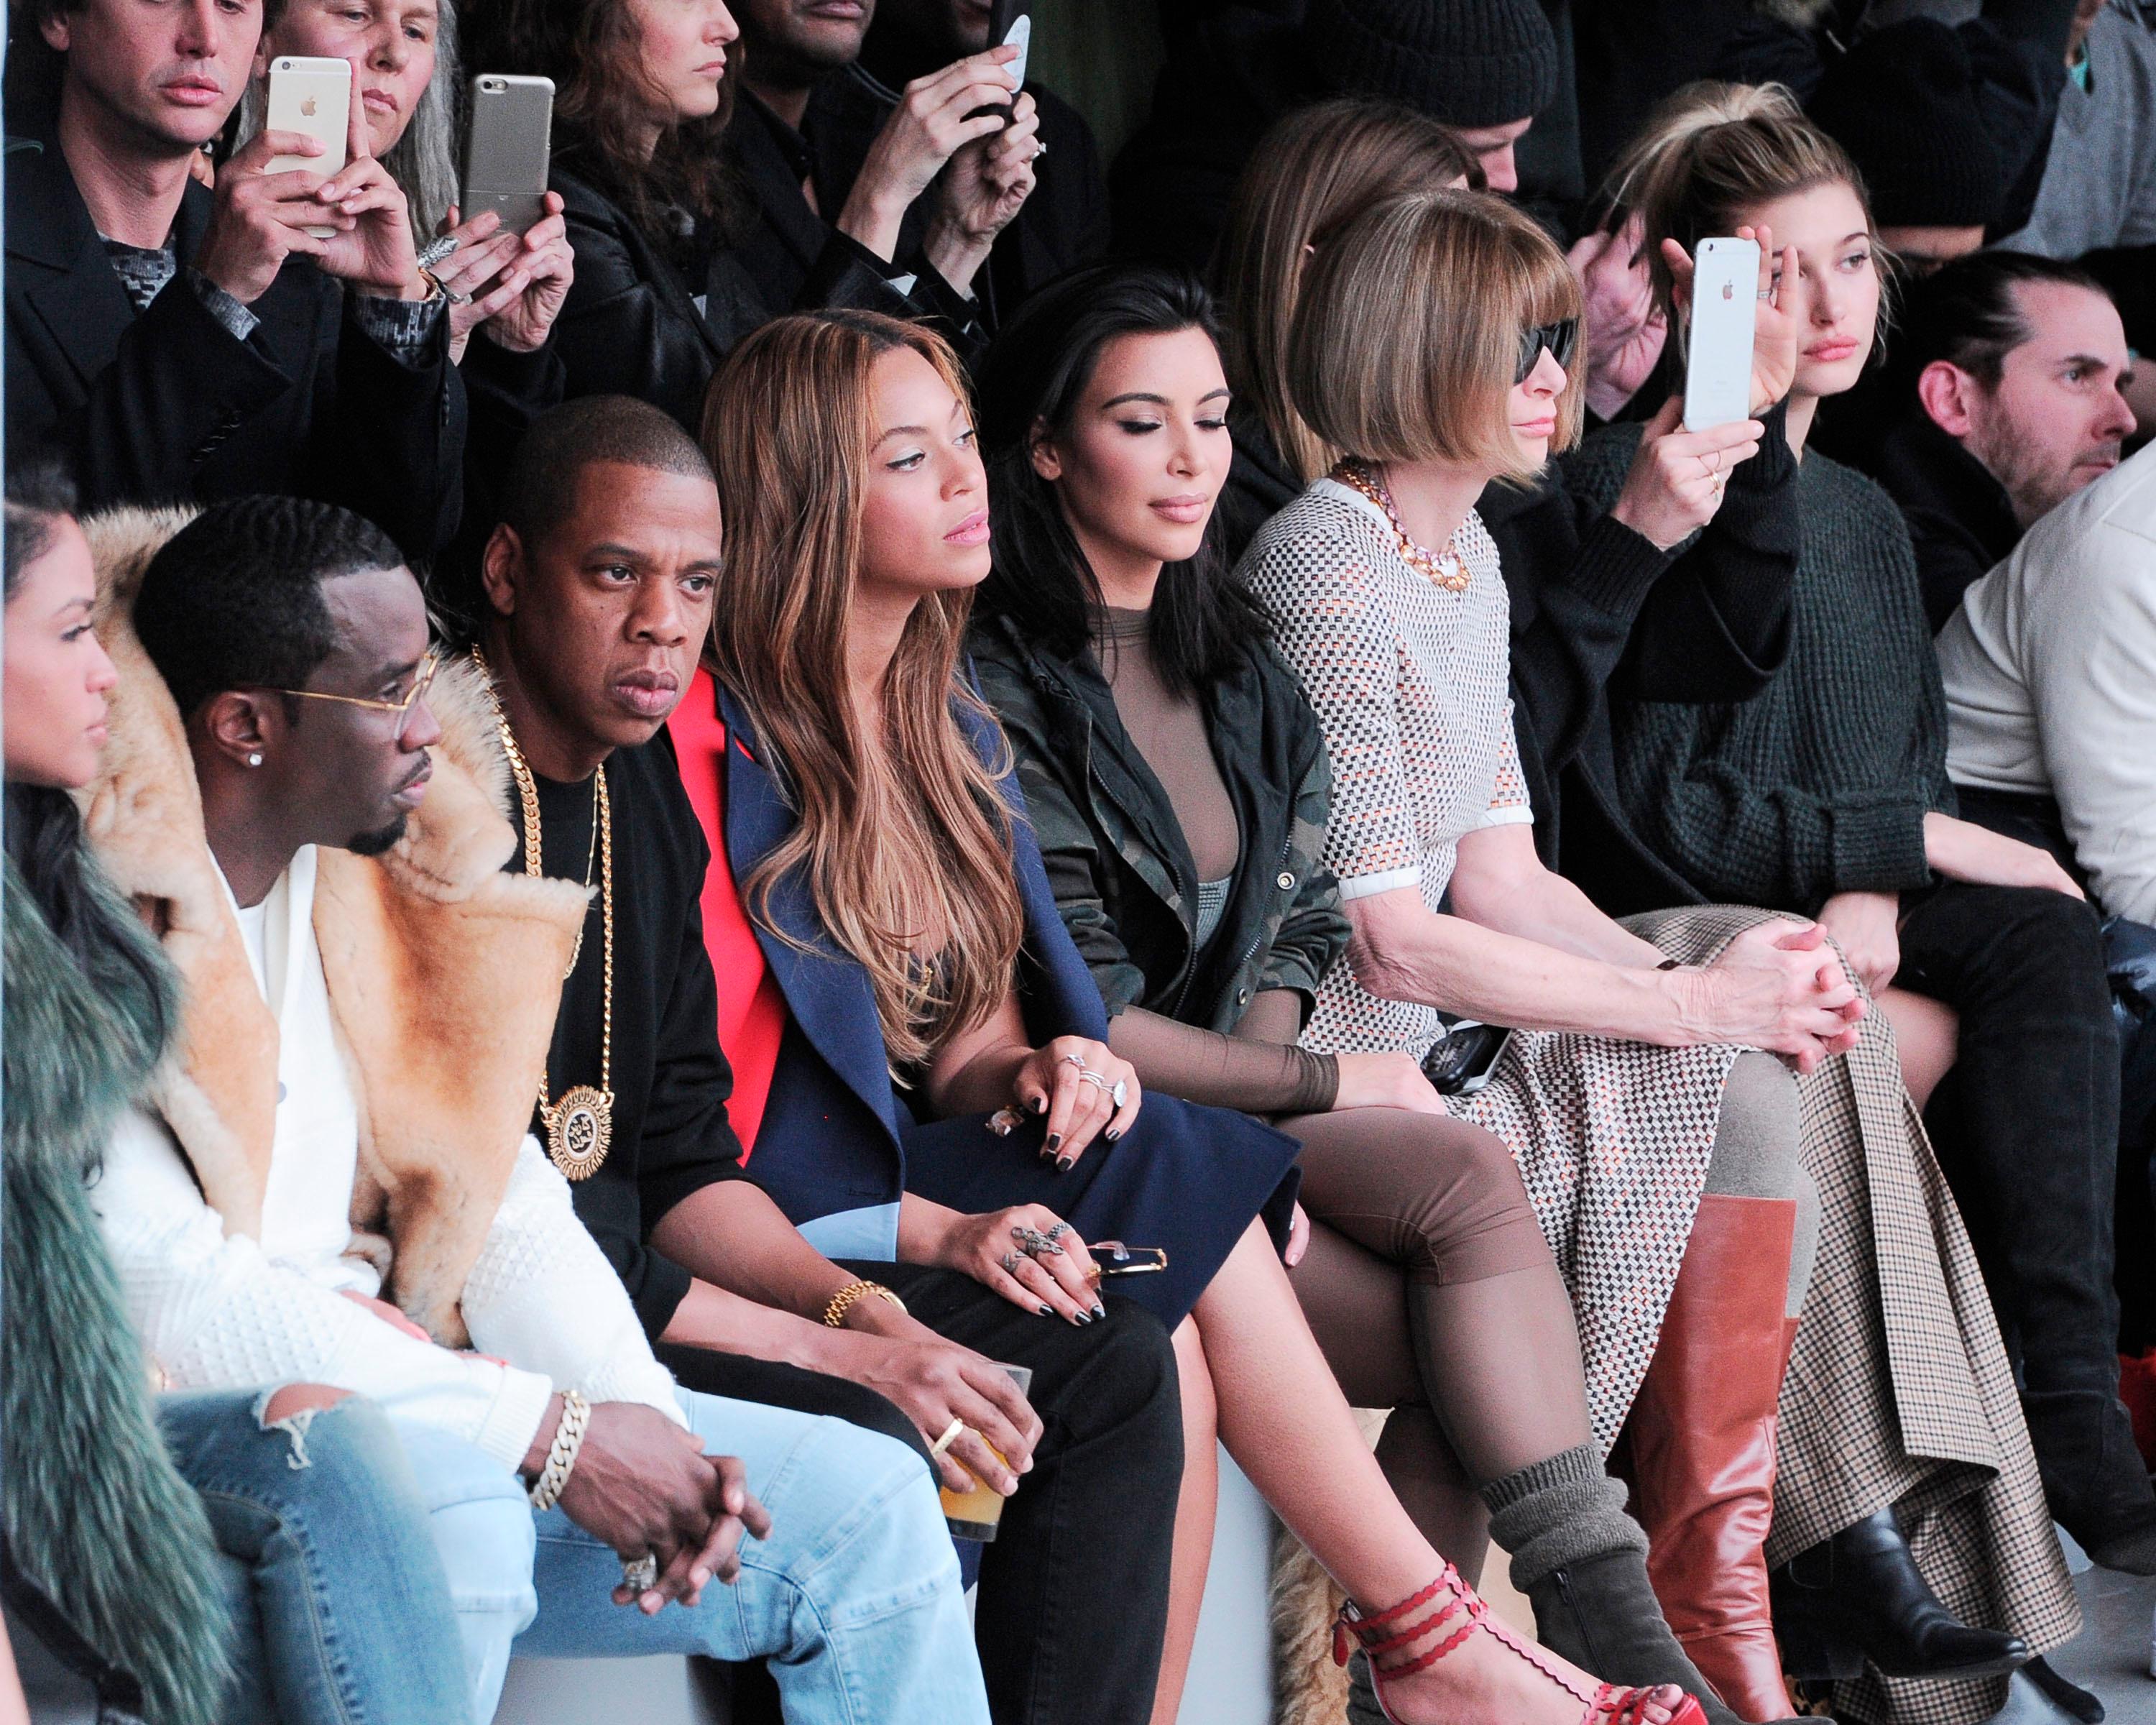 Check Out The Star-Studded Row At The Kanye West Adidas Who Got In Second Row!